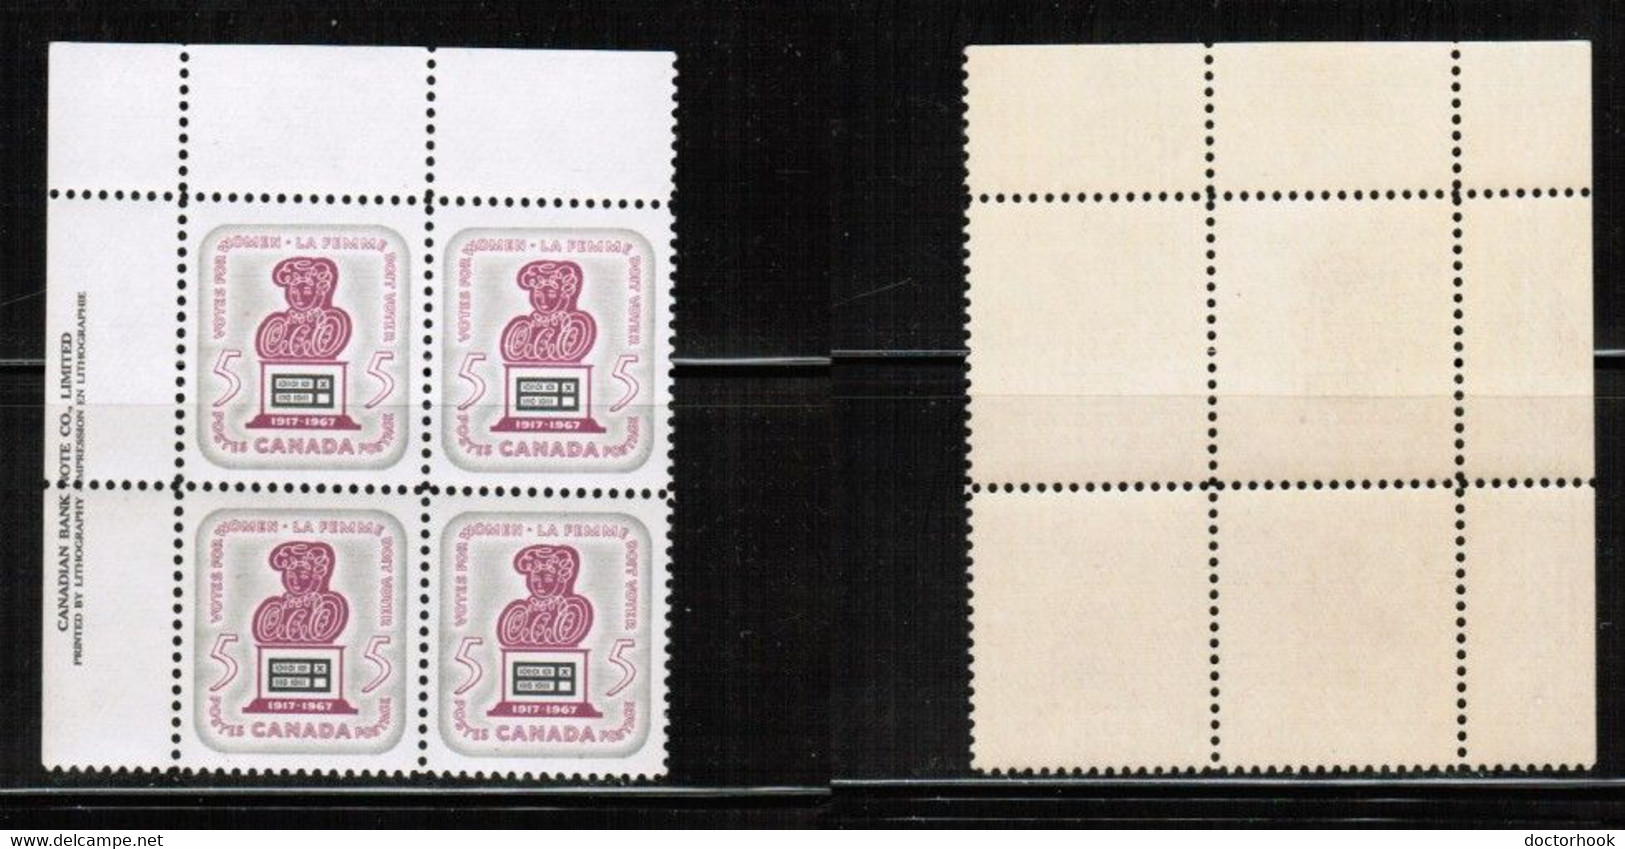 CANADA   Scott # 470** MINT NH INSCRIPTION BLOCK Of 4 CONDITION AS PER SCAN (LG-1456) - Plate Number & Inscriptions